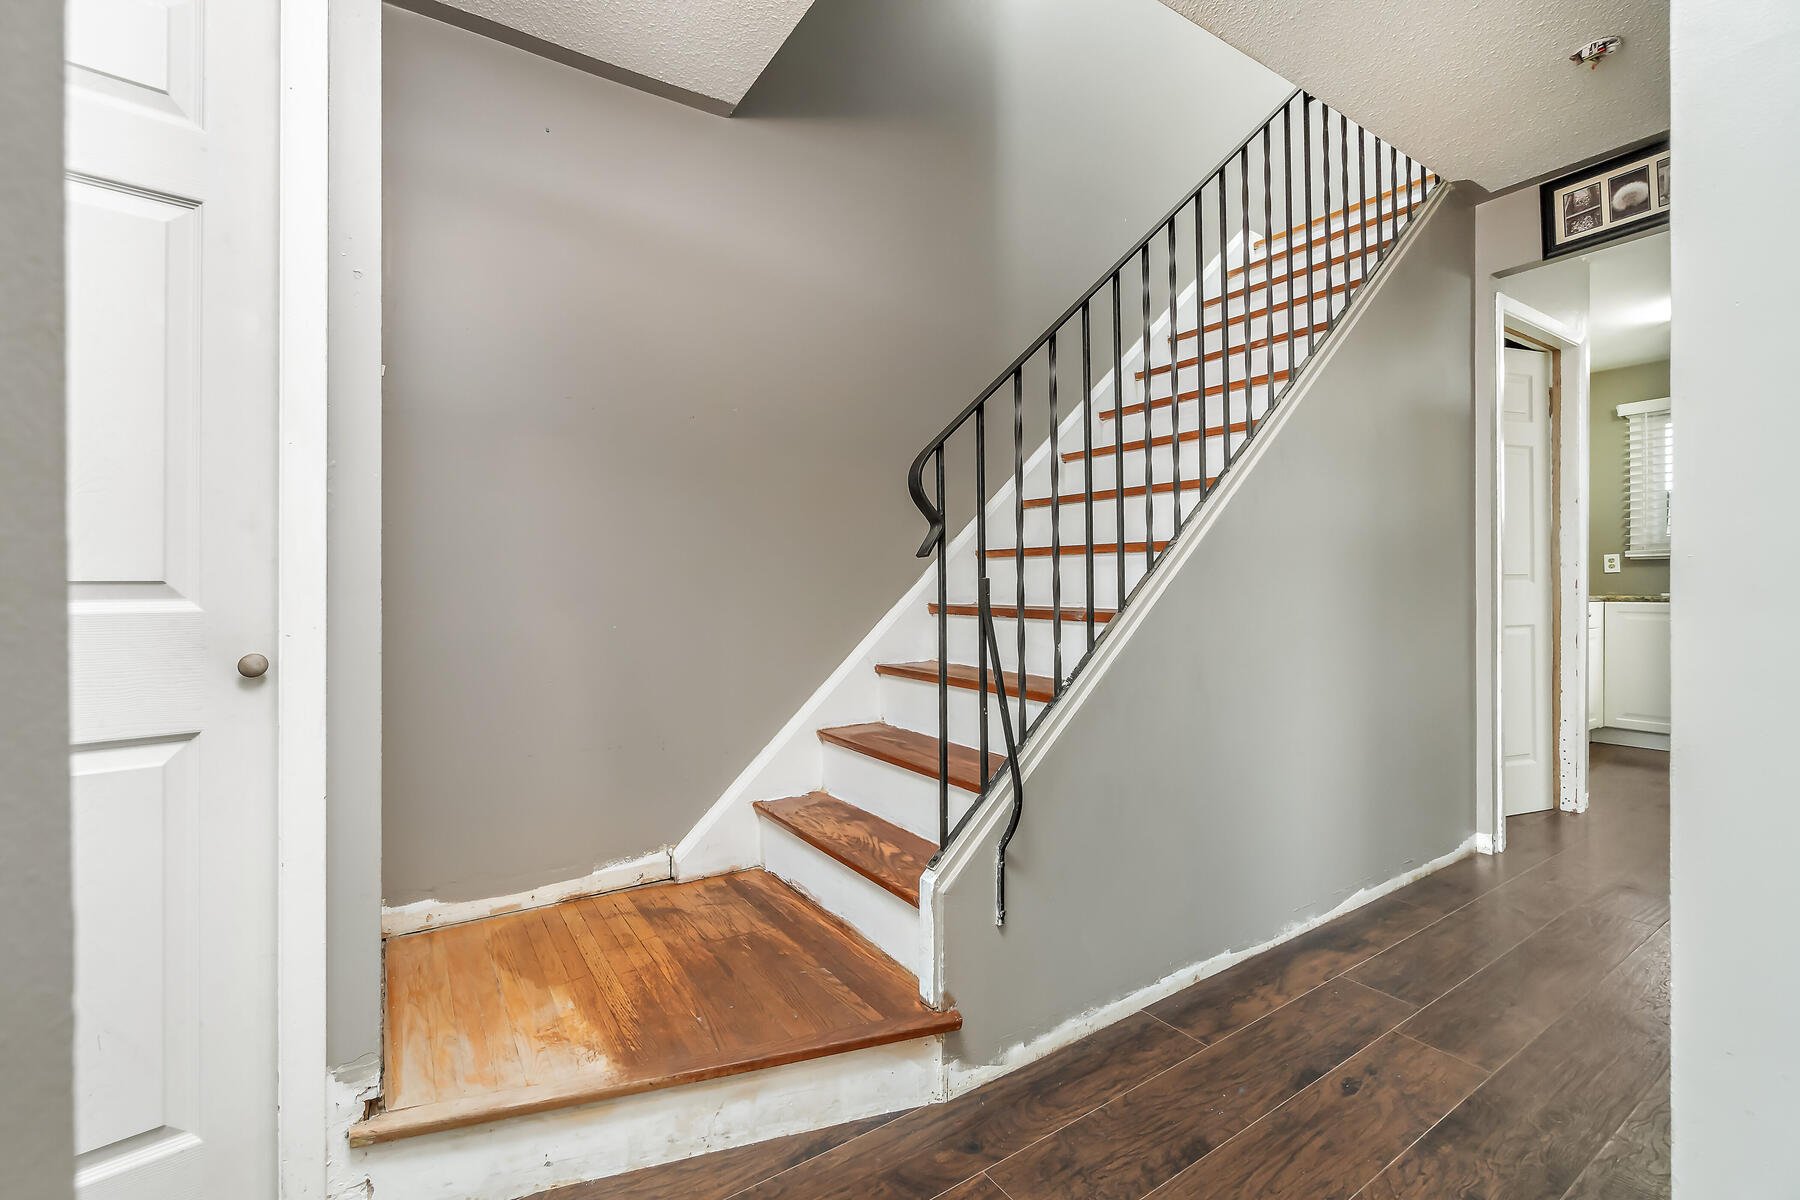 20 Mountainview Rd S Unit 30 Halton Hills ON L7G 4K3 Canada-022-016-Staircase-MLS_Size.jpg